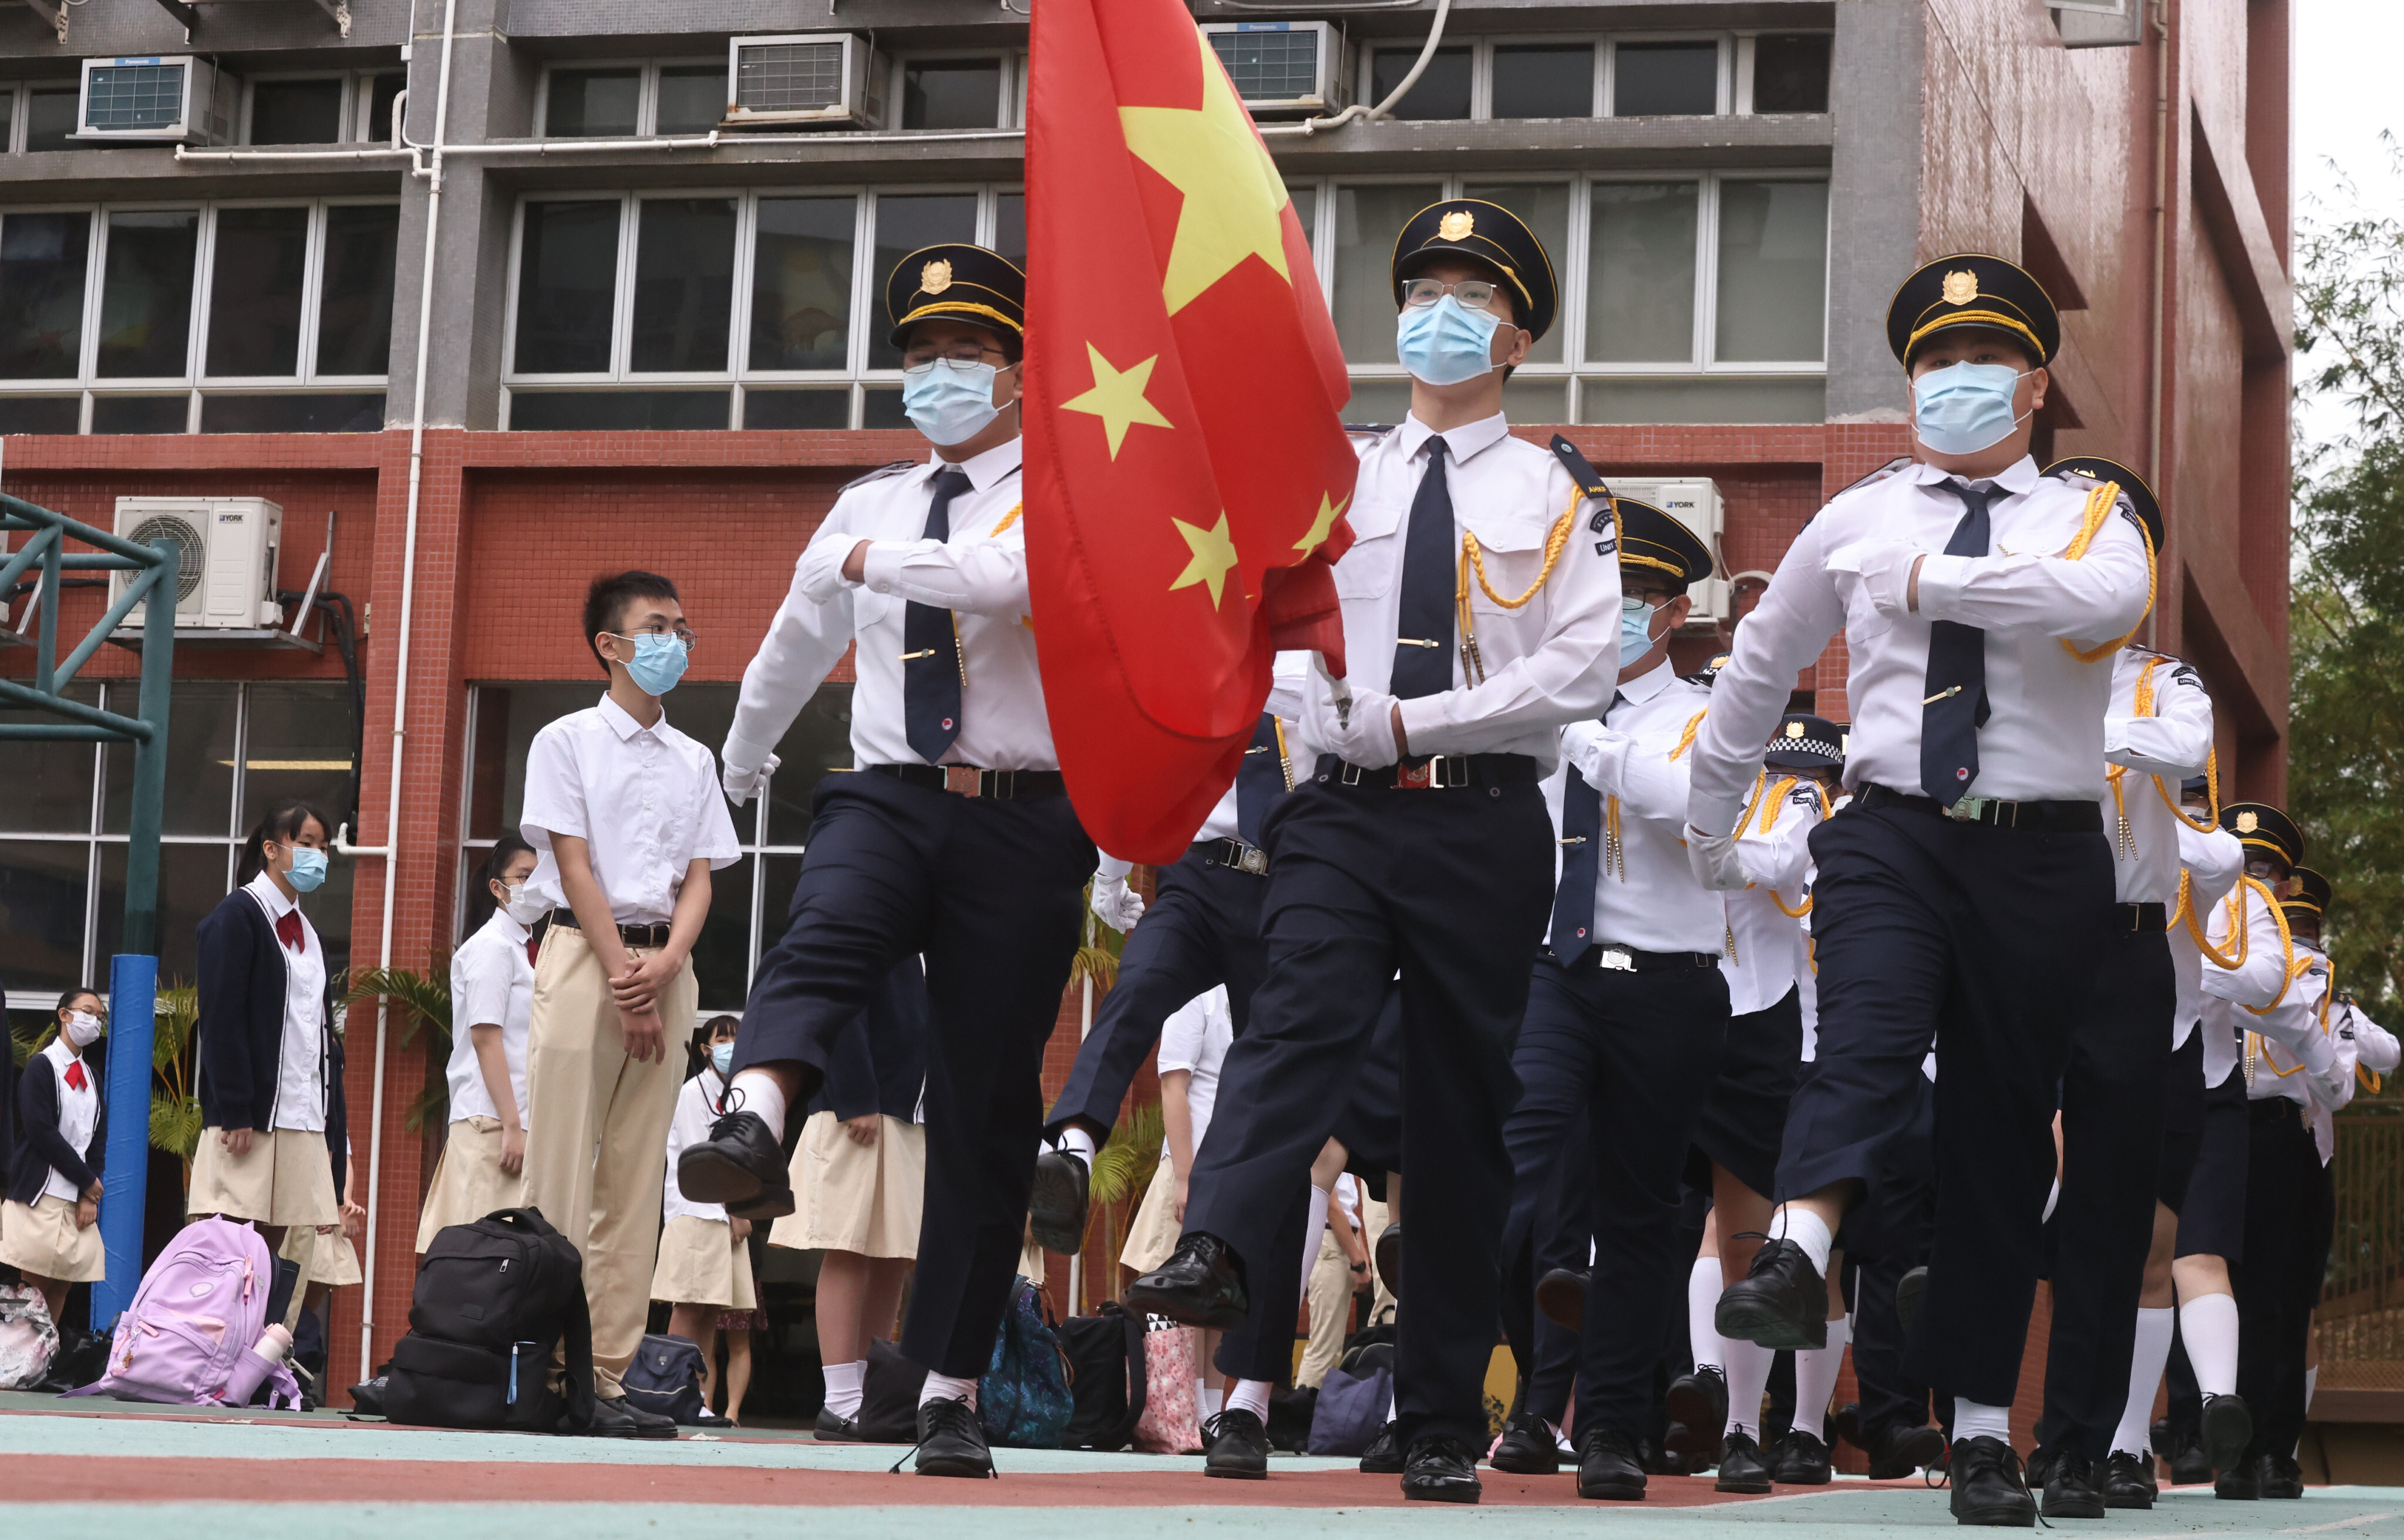 New guidelines on flag-raising in all educational institutions will take effect on January 1 next year. Photo: SCMP/K. Y. Cheng